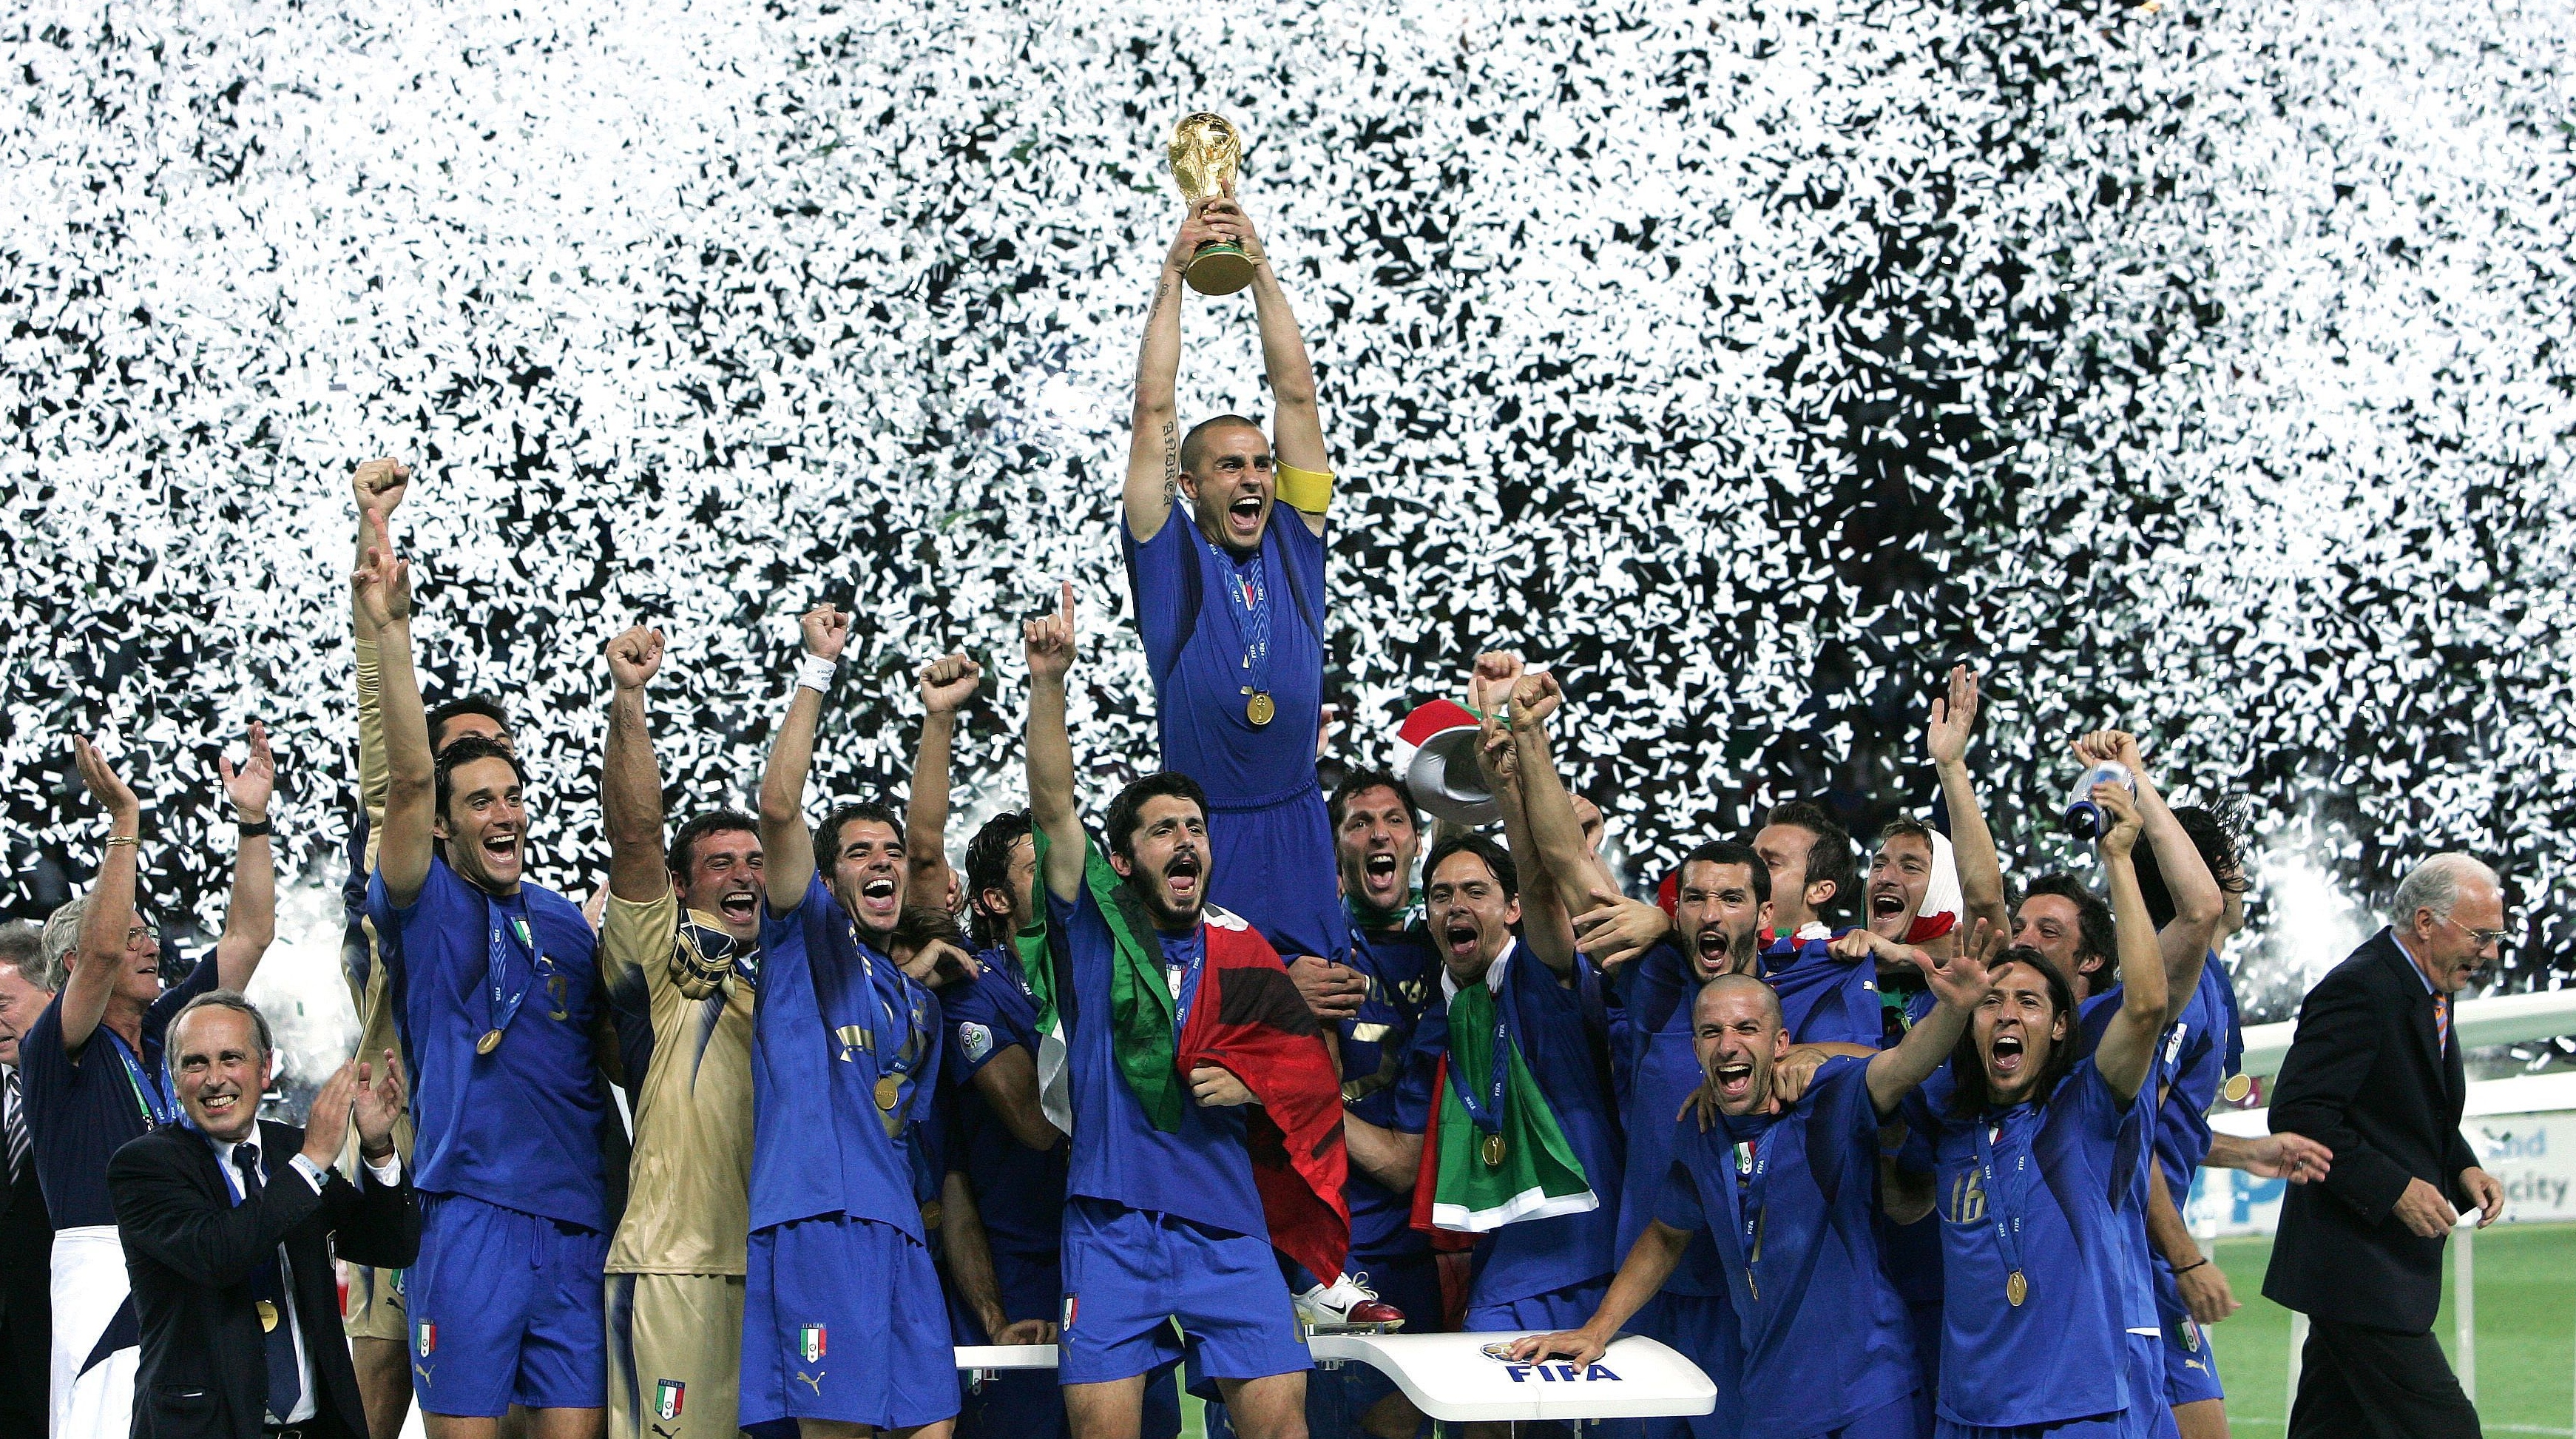 Fabio Cannavaro of Italy and his teammates celebrate with the trophy at the end the World Cup 2006 final football game Italy and France, 09 July 2006 at Berlin stadium. Italy won the 2006 football World Cup by defeating France on penalties. (Photo by Alessandro Sabattini/Getty Images)